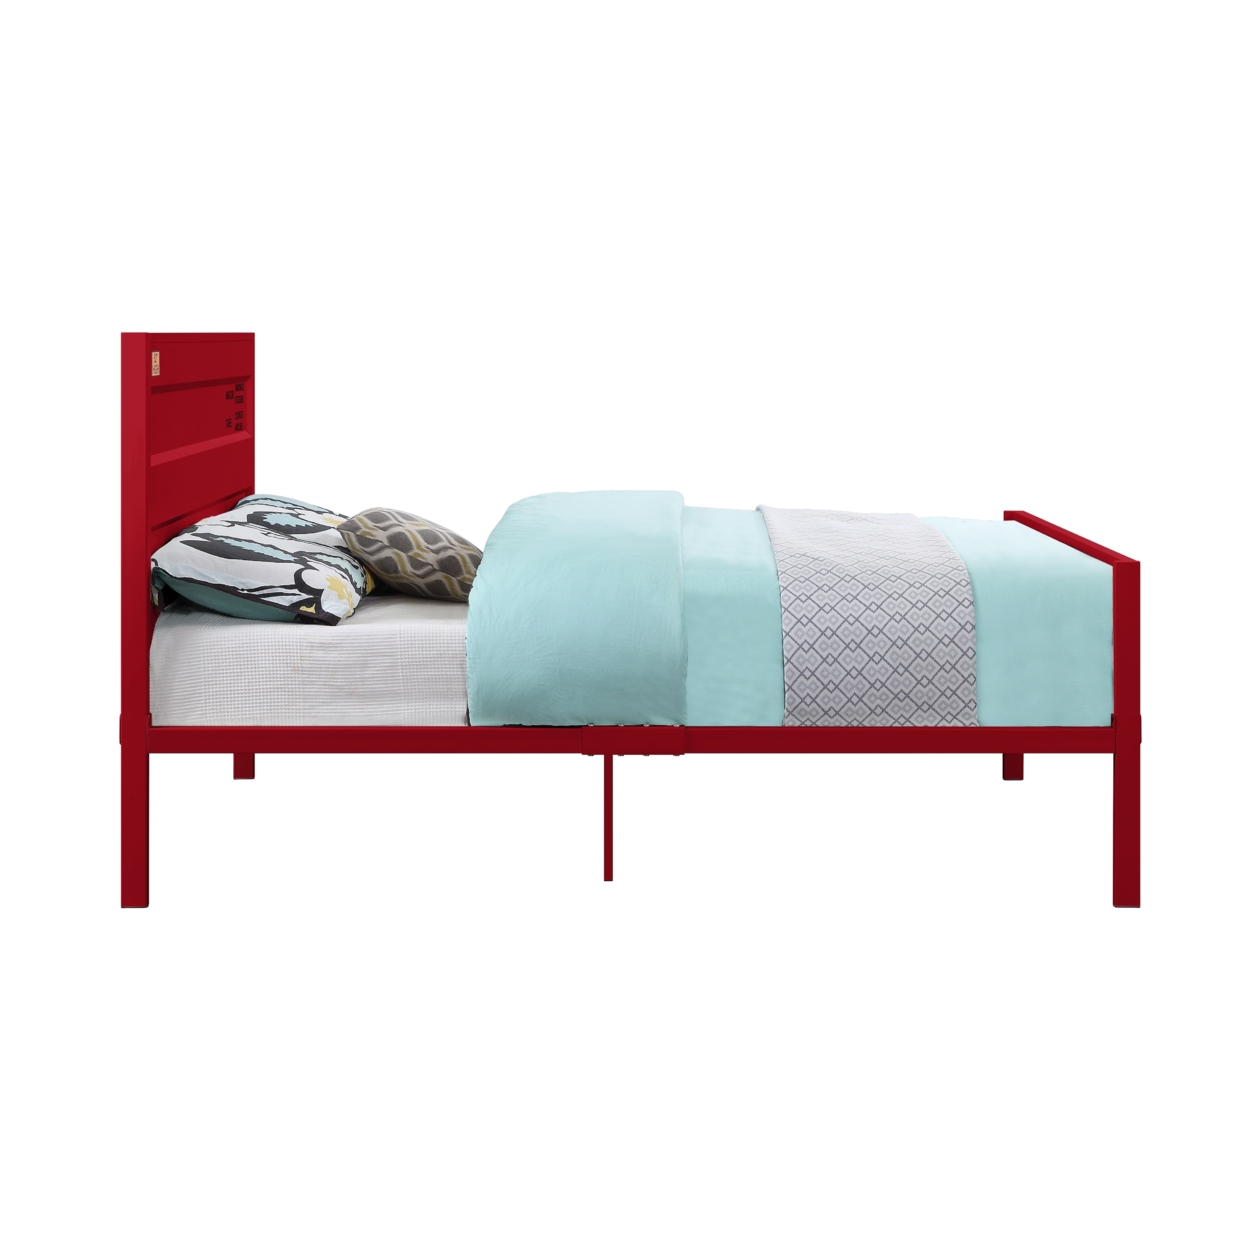 Industrial Style Metal Full Size Bed With Straight Leg Support, Red- Saltoro Sherpi